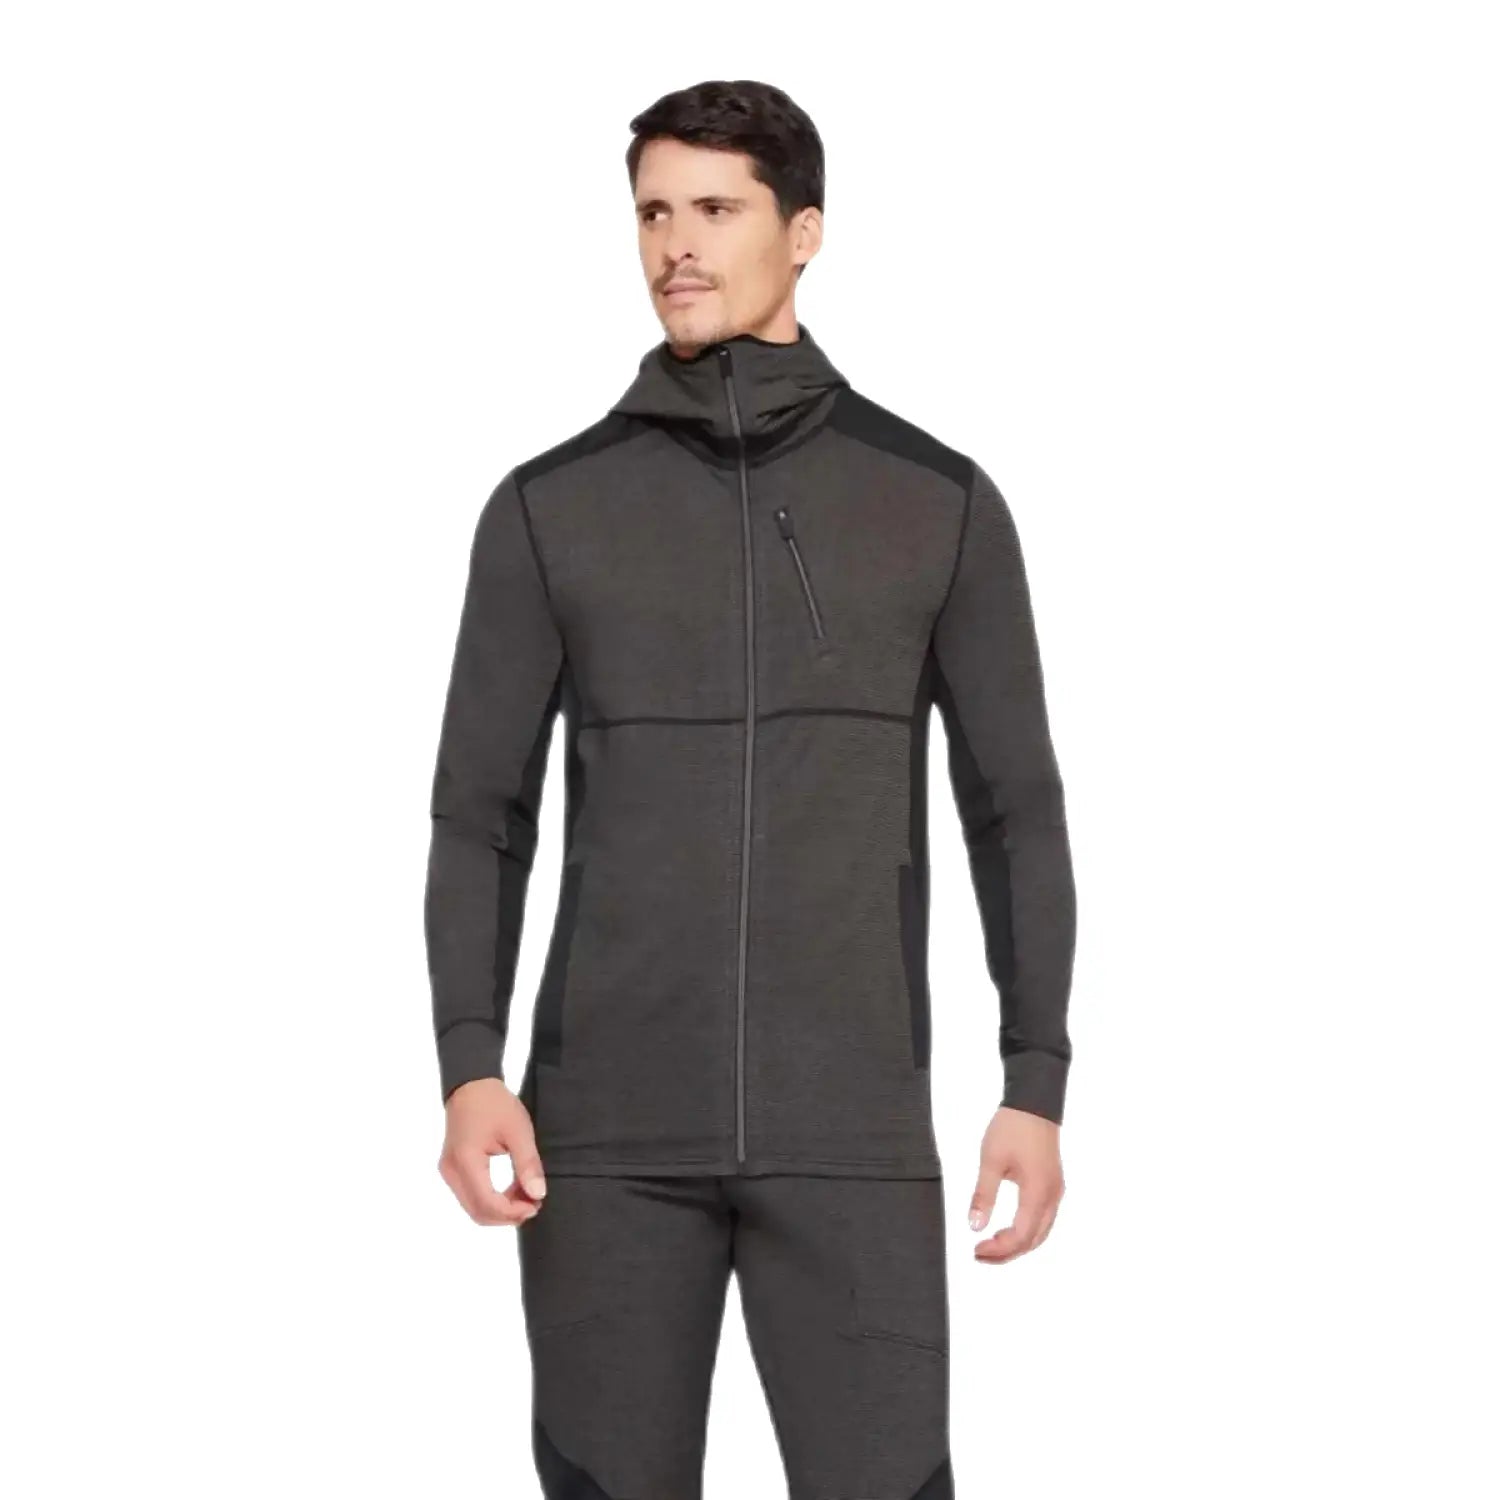 Terramar Men's C-Suite Fusion Full-Zip Thermal Hoodie shwon on model in the Brinde Black color option. Front view.